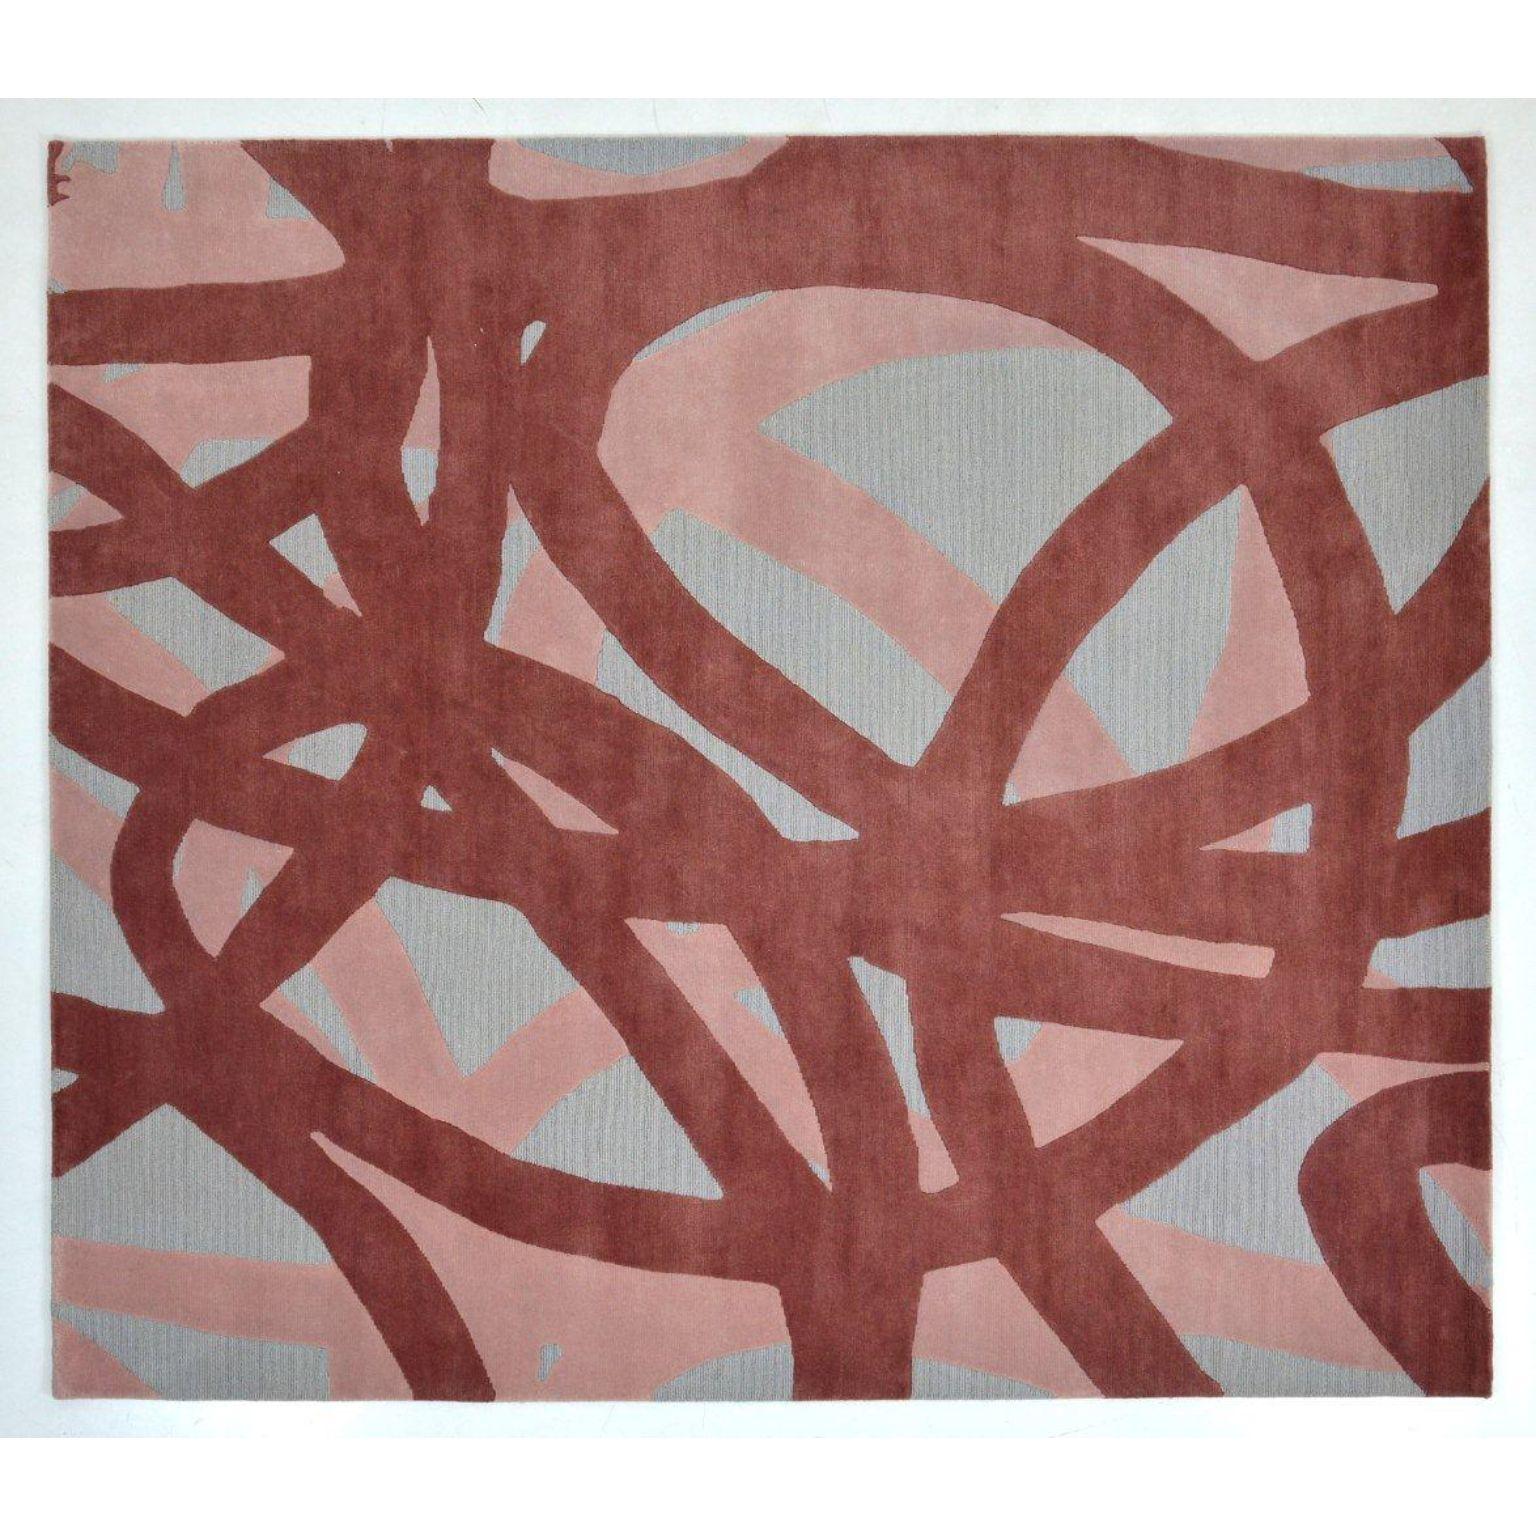 Ribbon small rug by Art & Loom
Dimensions: D243.4 x H304.8 cm
Materials: 100% New Zealand wool
Quality (Knots per Inch): 60
Also available in different dimensions.

Samantha Gallacher has always had a keen eye for aesthetics, drawing